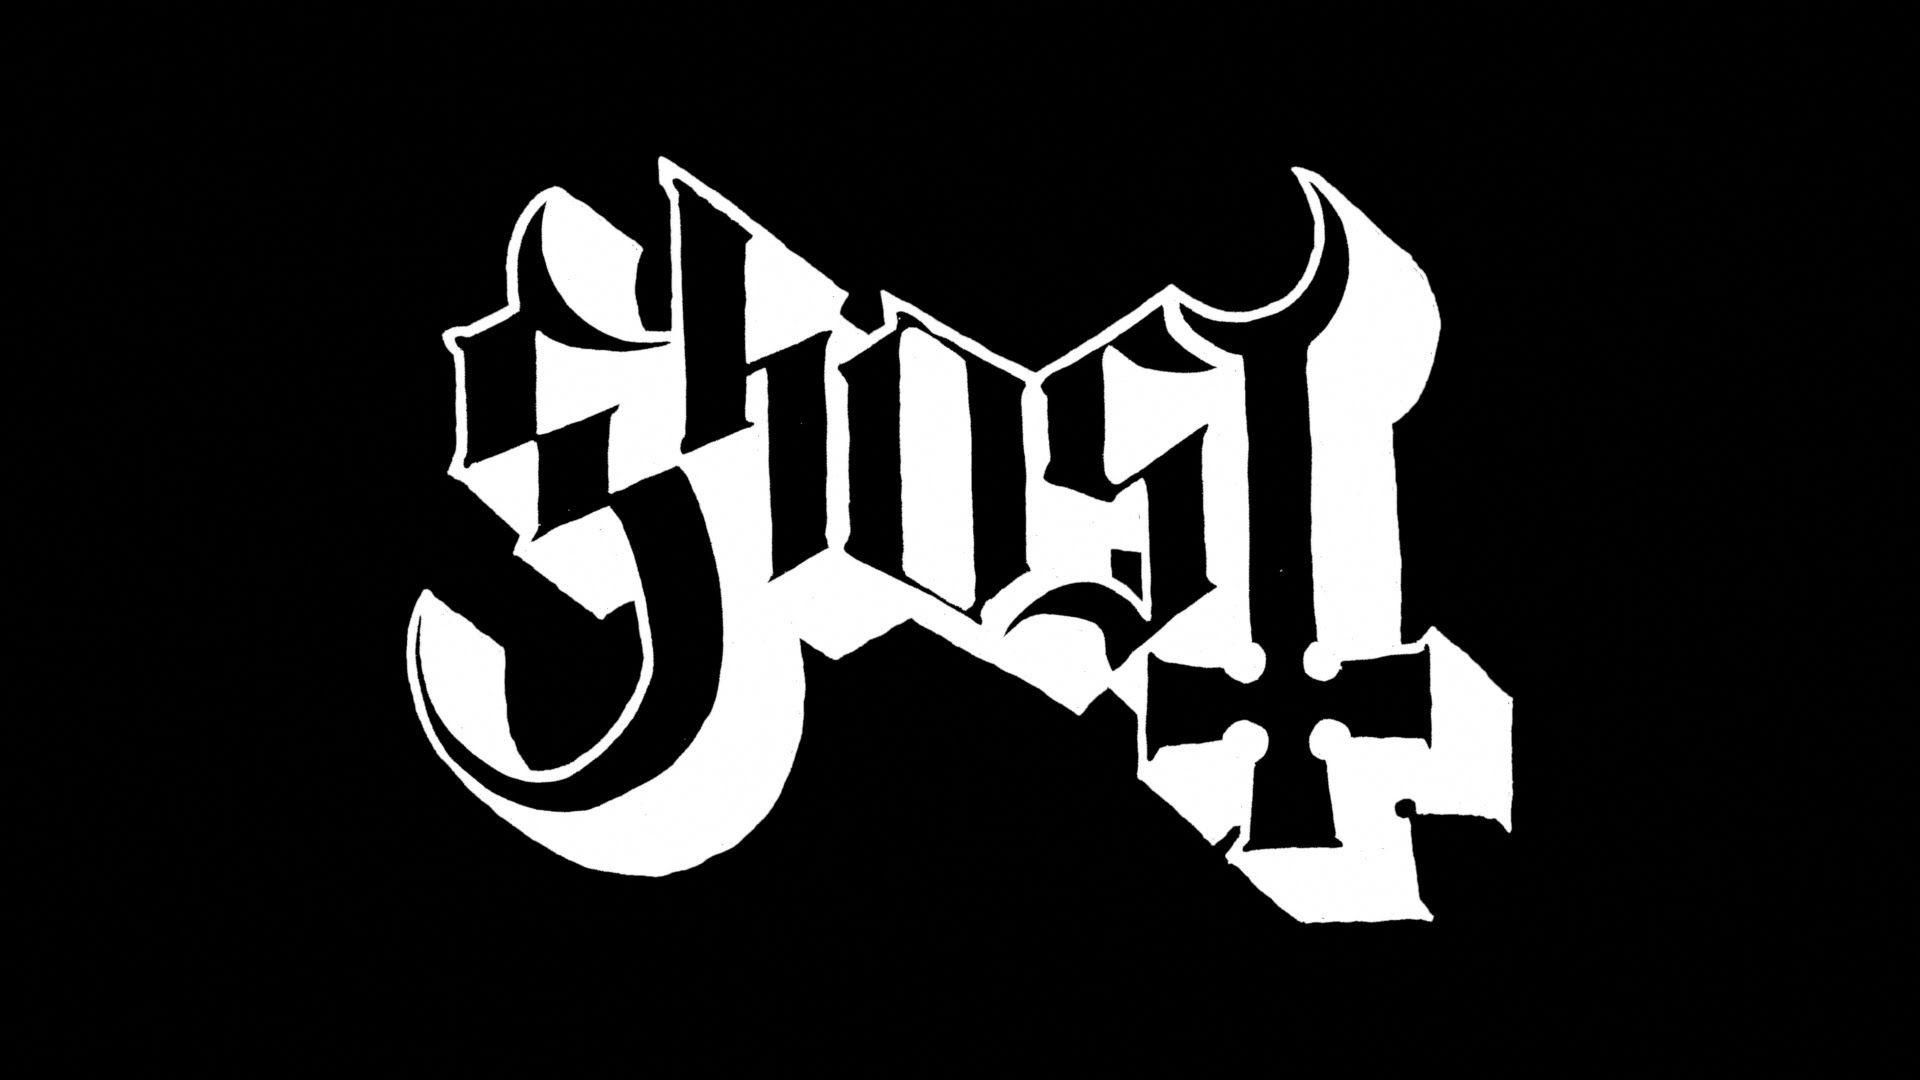 Ghost band wallpaper wallpaper by Ryan15bread  Download on ZEDGE  3099